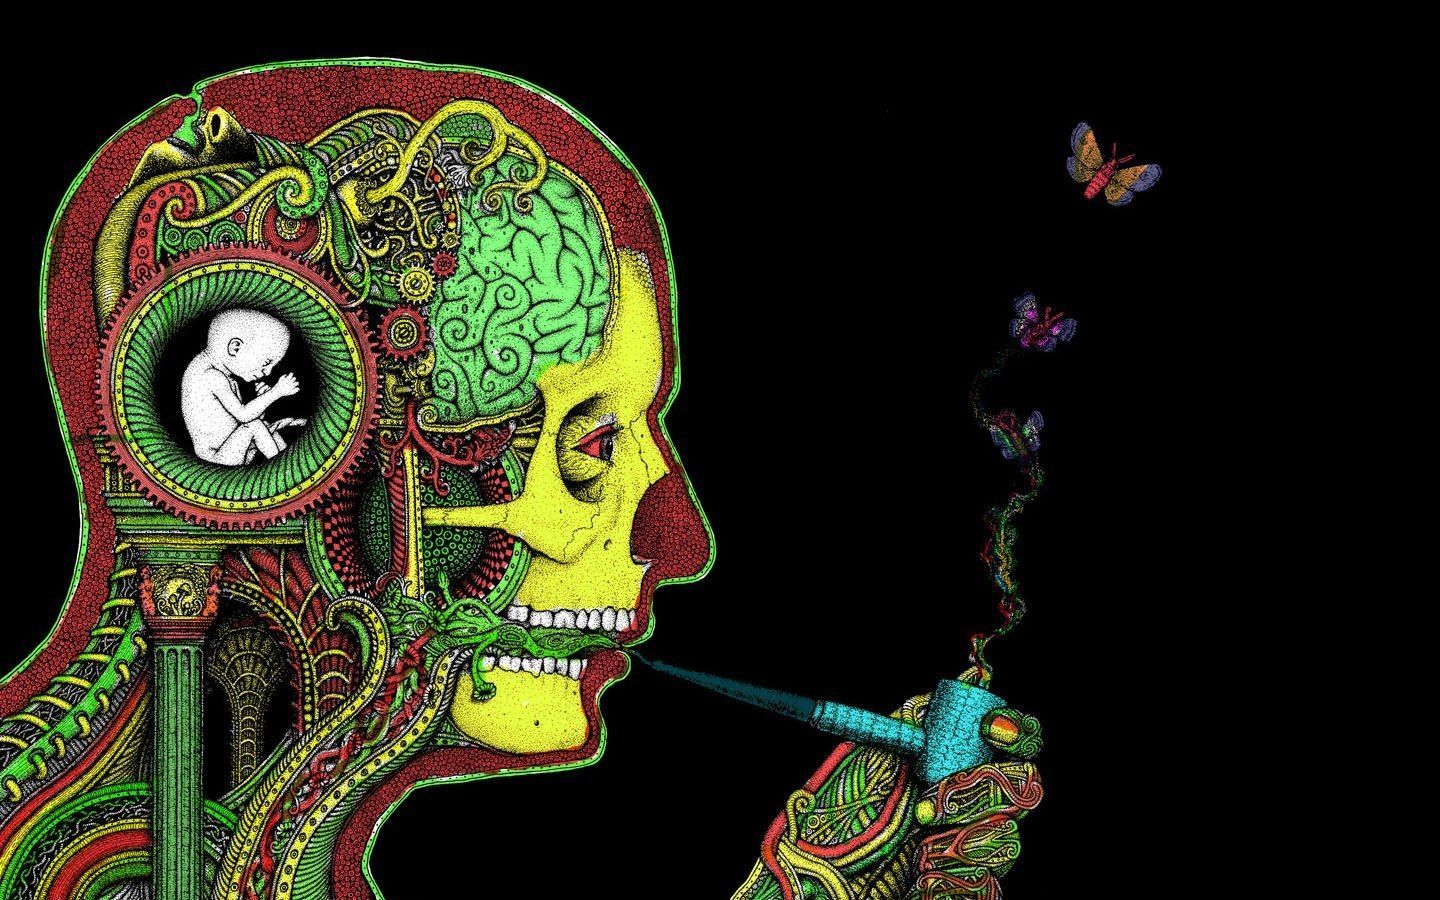 Trippy wallpaper 1440x900 - (#40005) - High Quality and Resolution ...